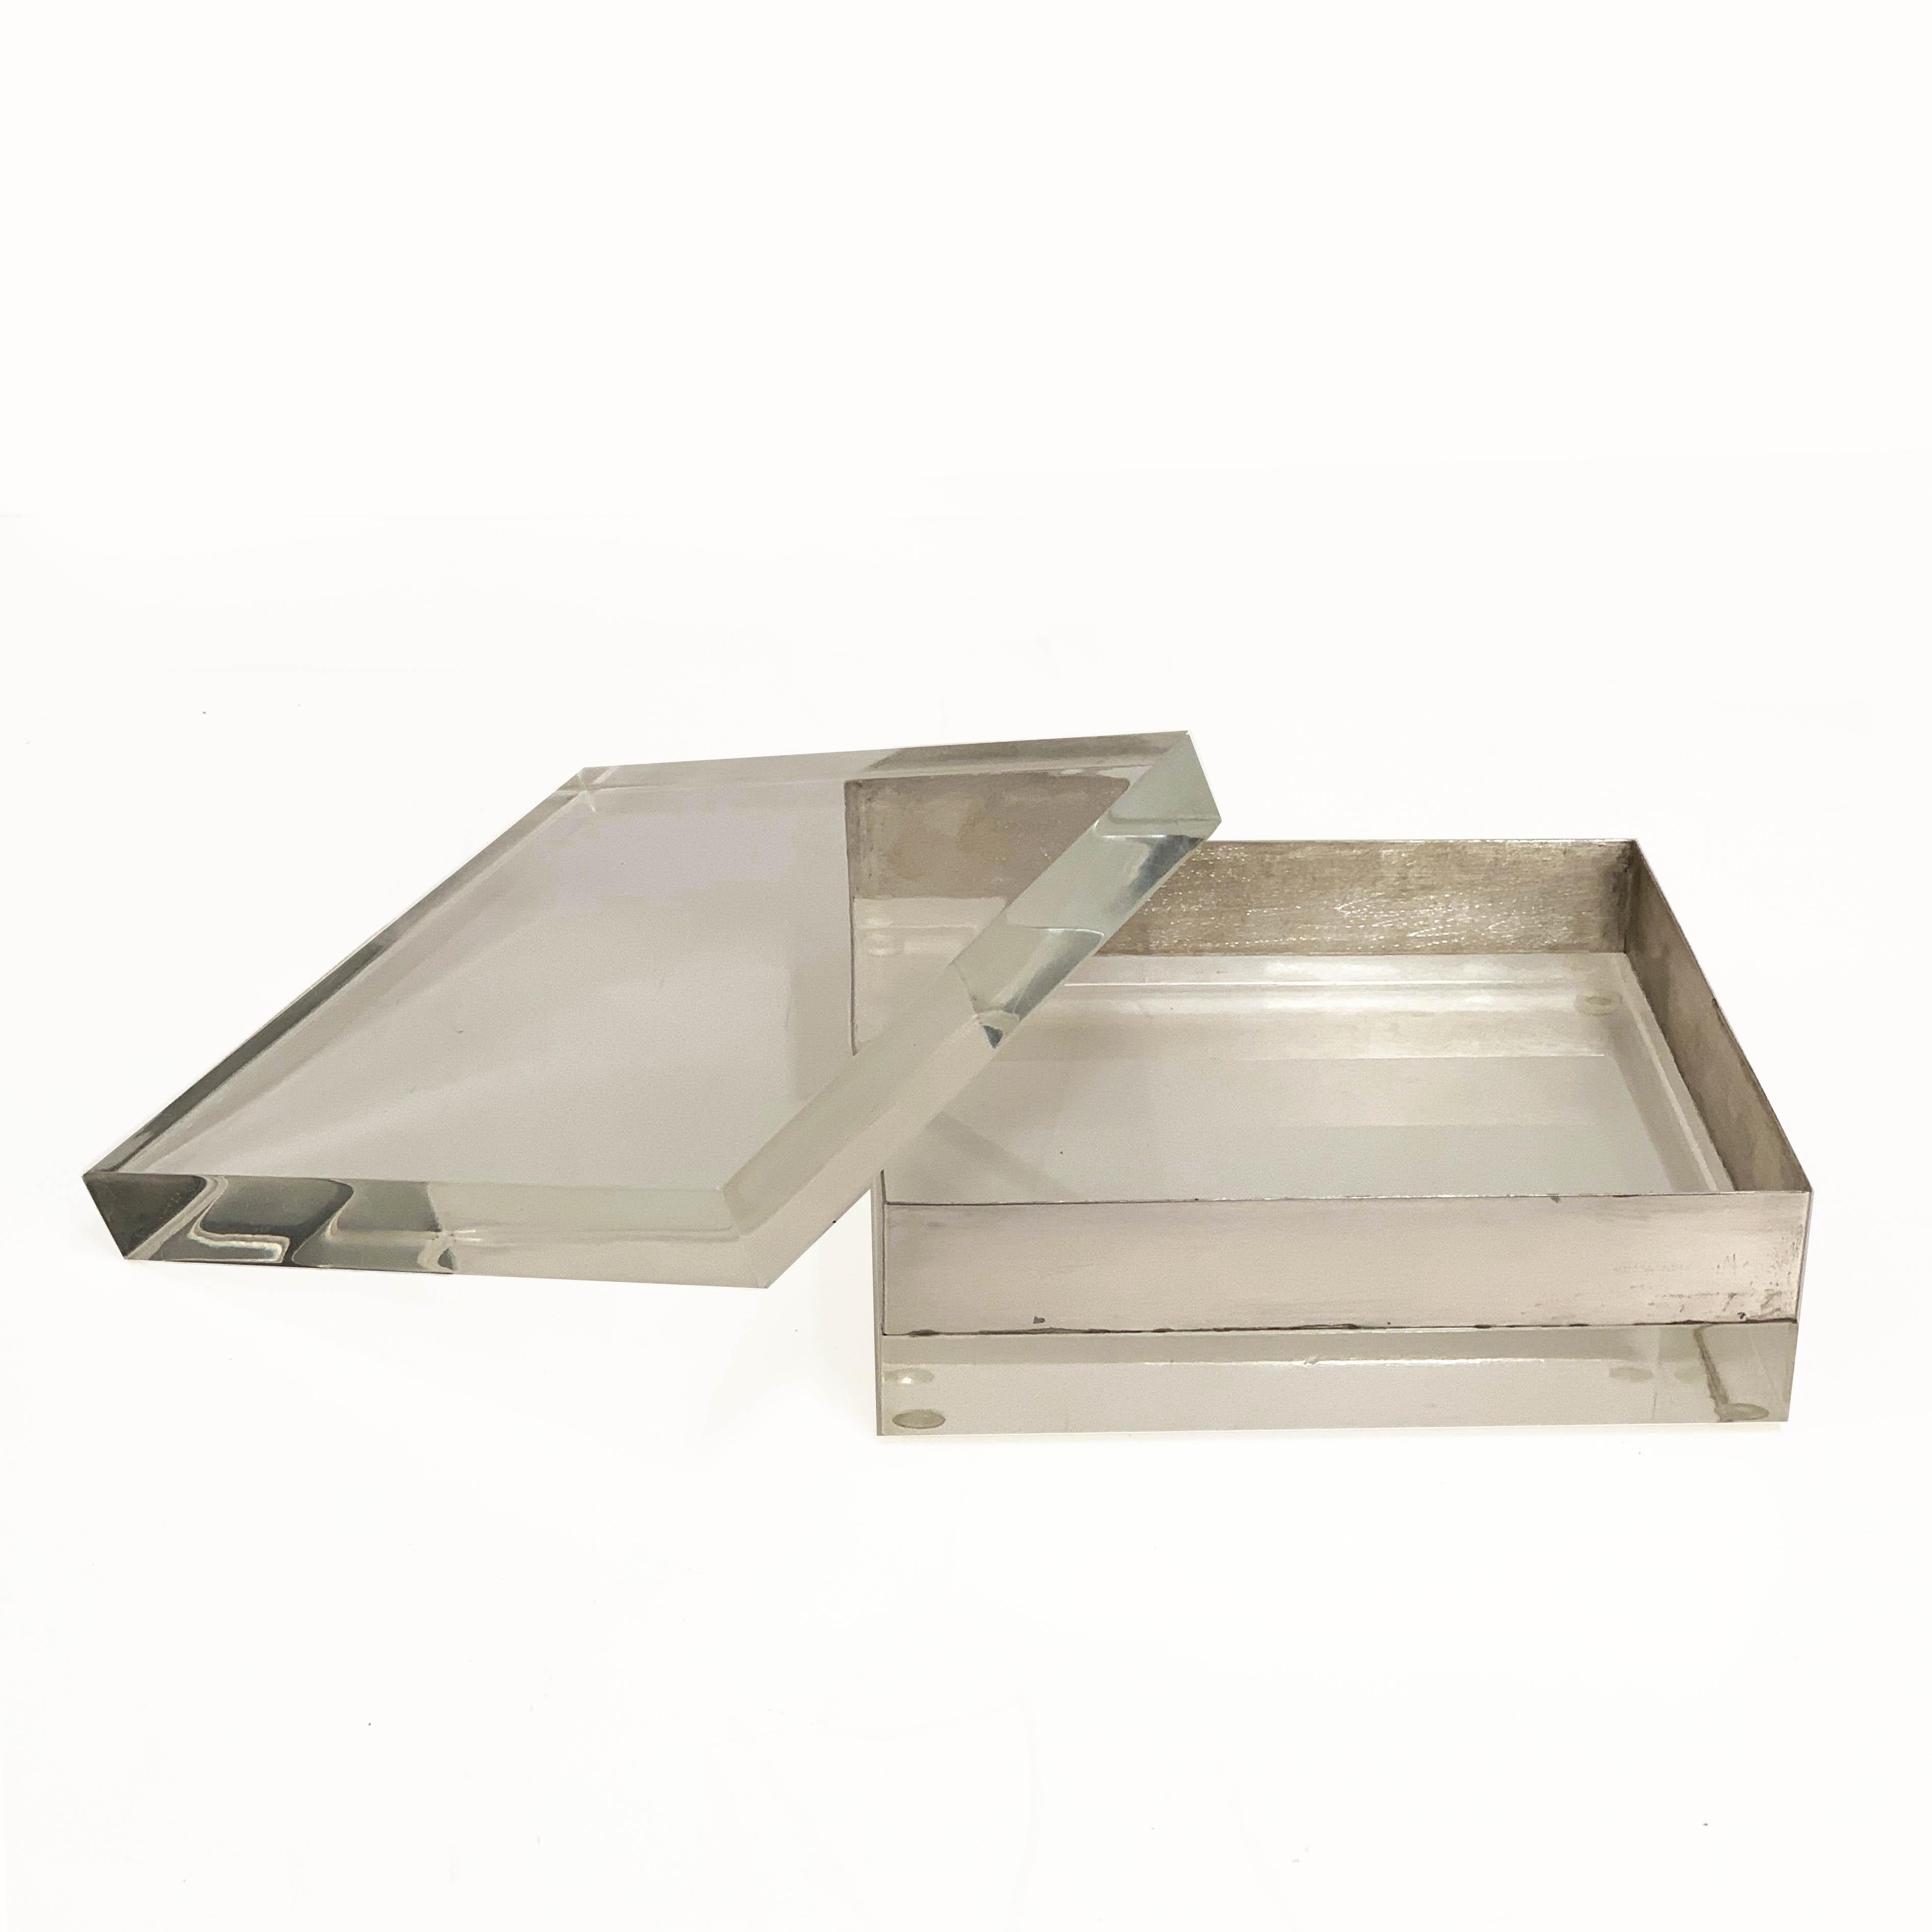 Amazing Lucite and silver squared decorative box. This item was designed in the 1970s.

This piece is made of a crystal Lucite and silver with a crystal Lucite removable top, the way this item reflect the light is just magnificent and makes this